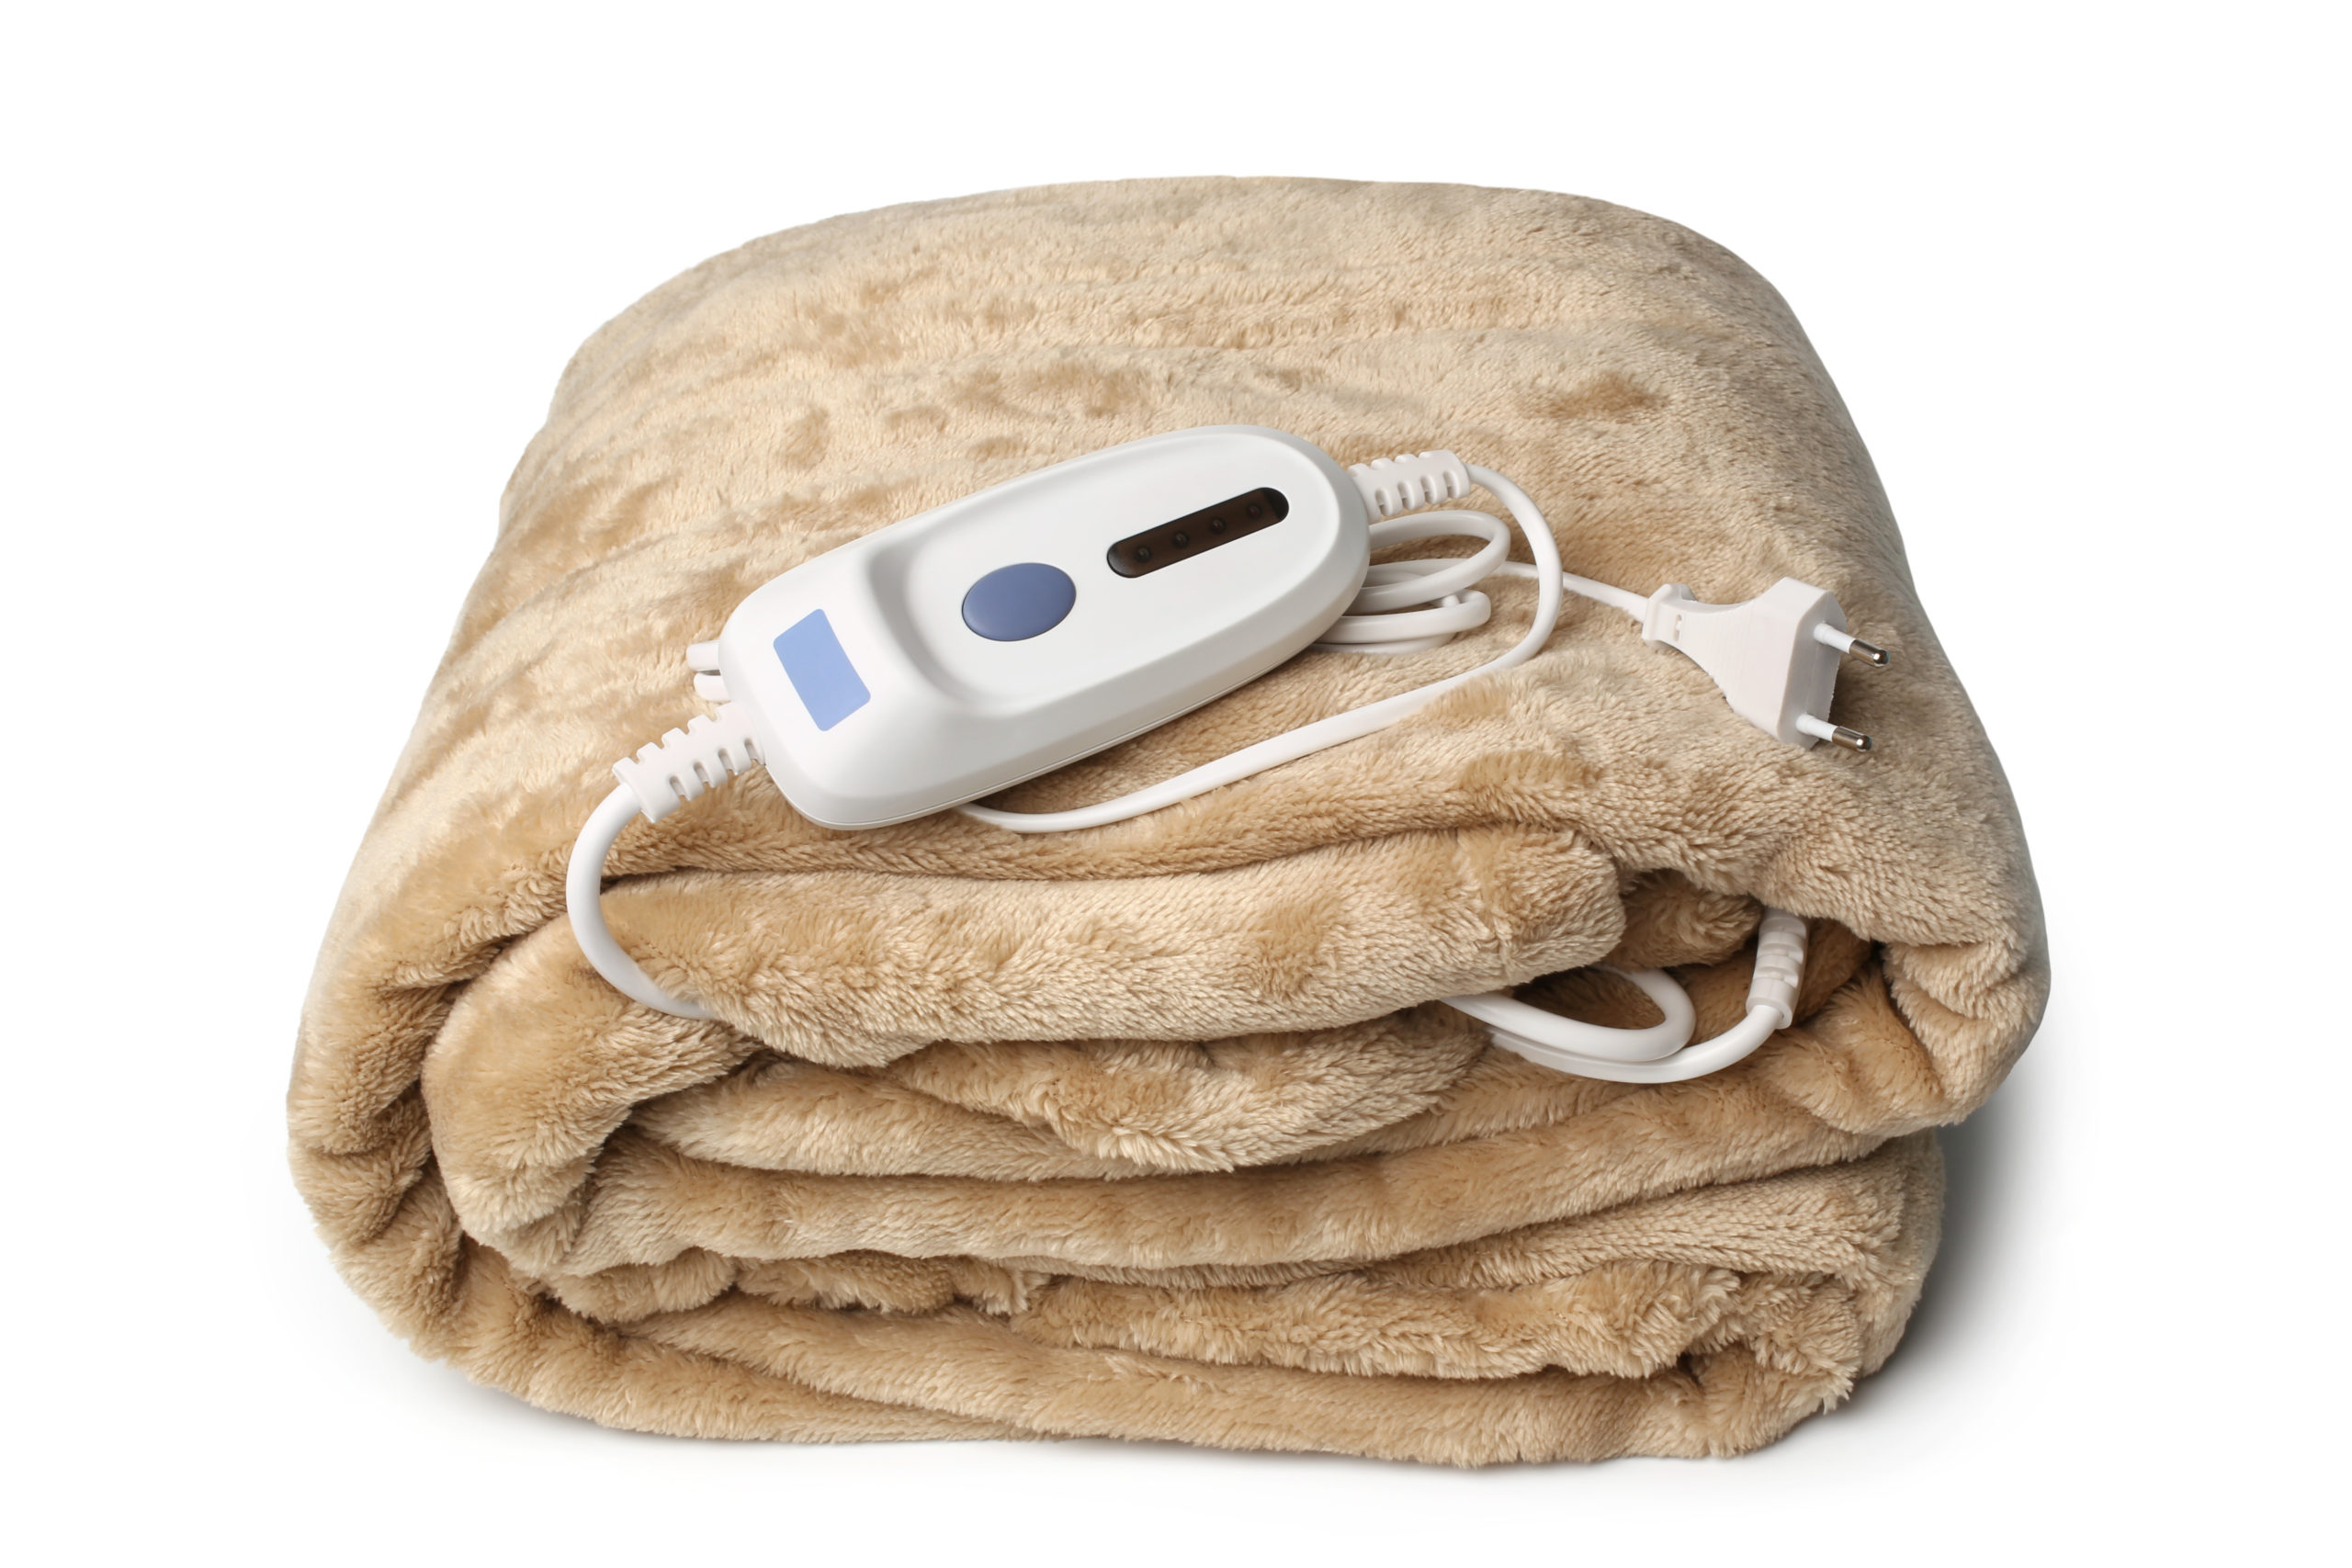 heating and cooling blanket